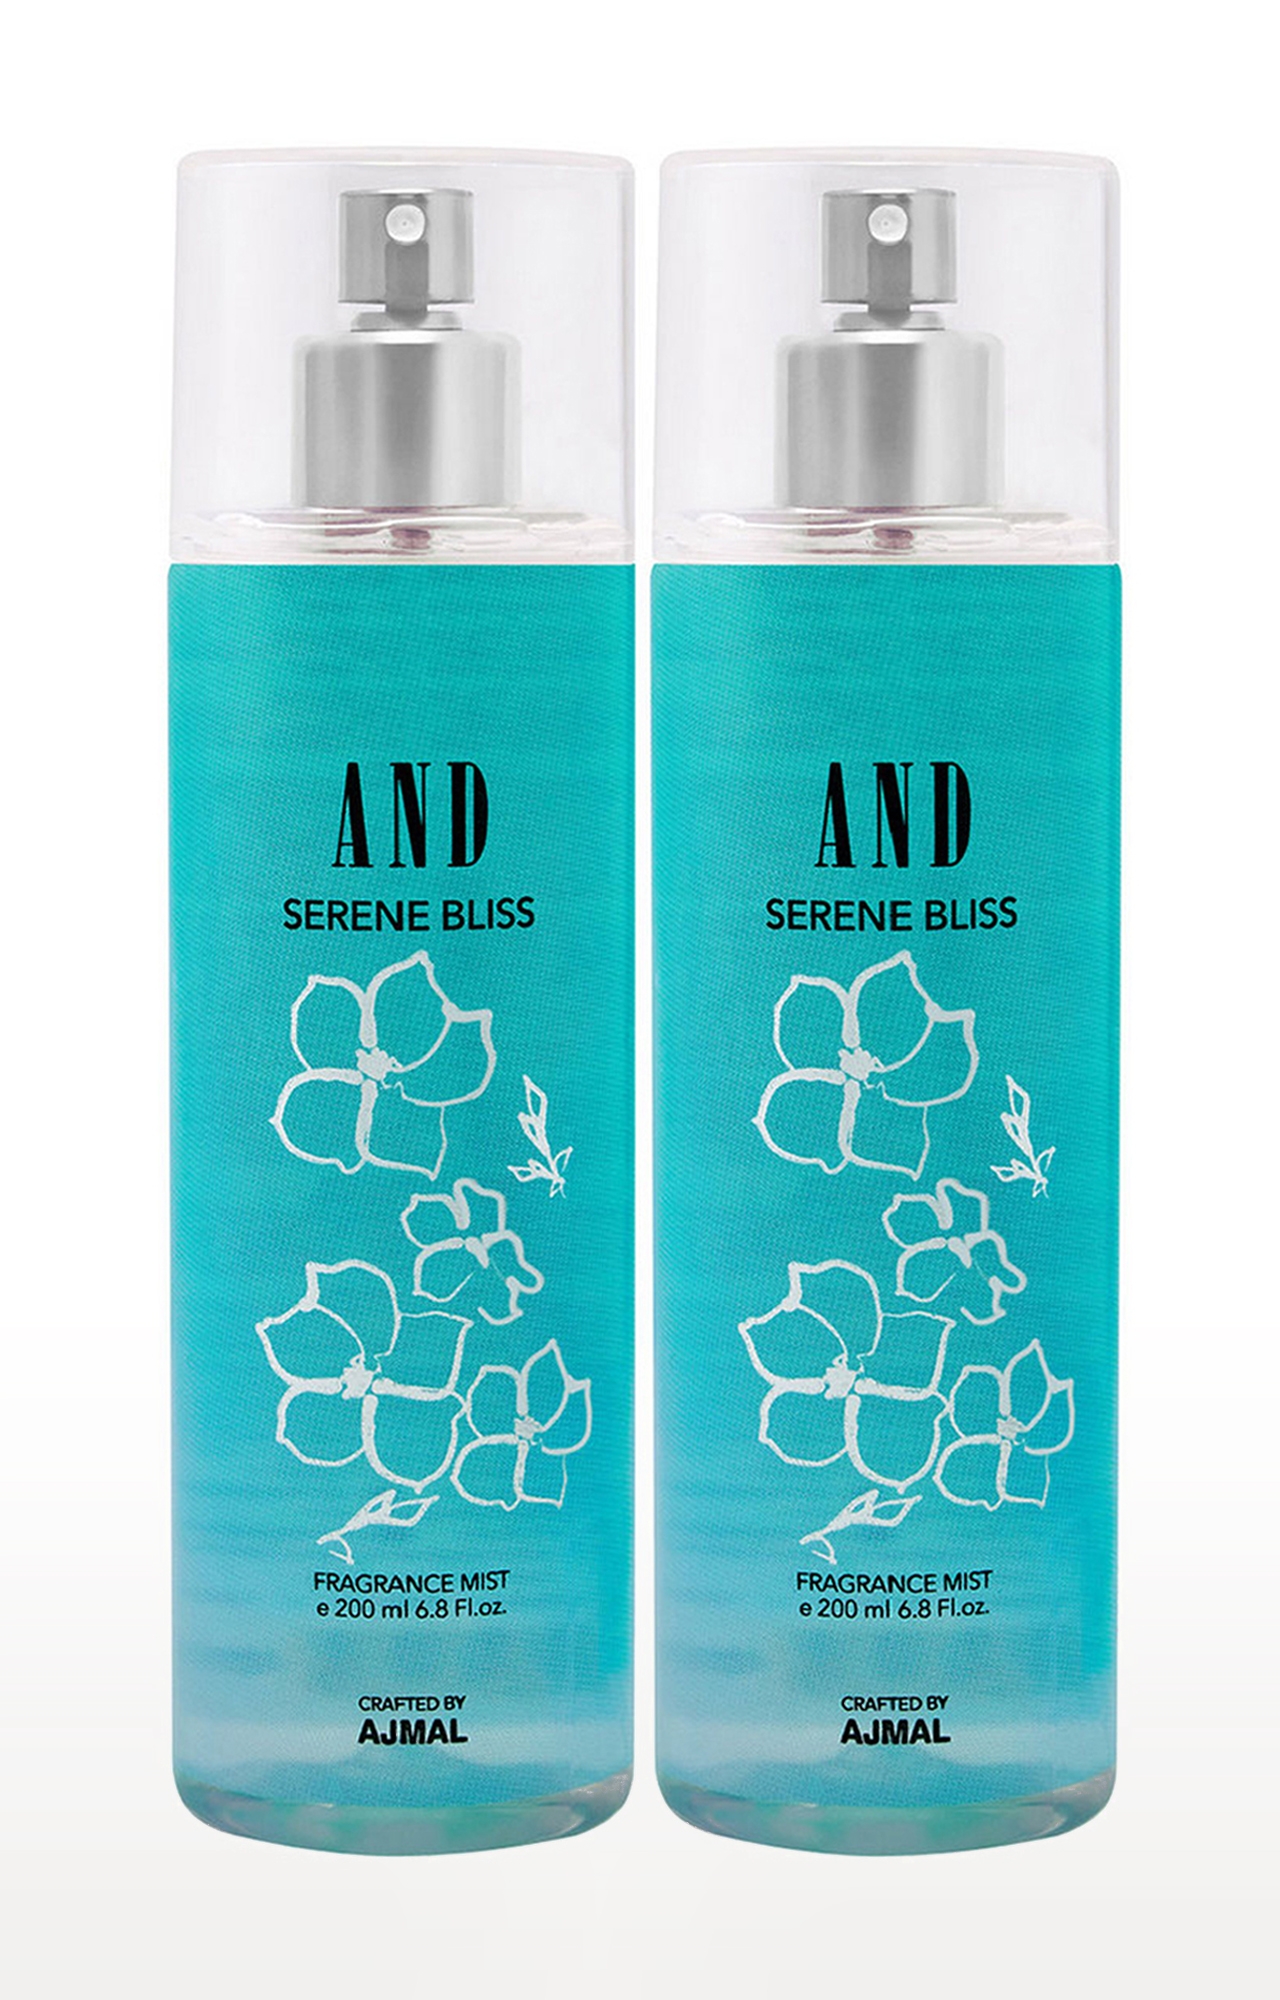 AND Serene Bliss Pack of 2 Body Mist 200ML each Long Lasting Scent Spray Gift For Women Perfume Crafted by Ajmal FREE